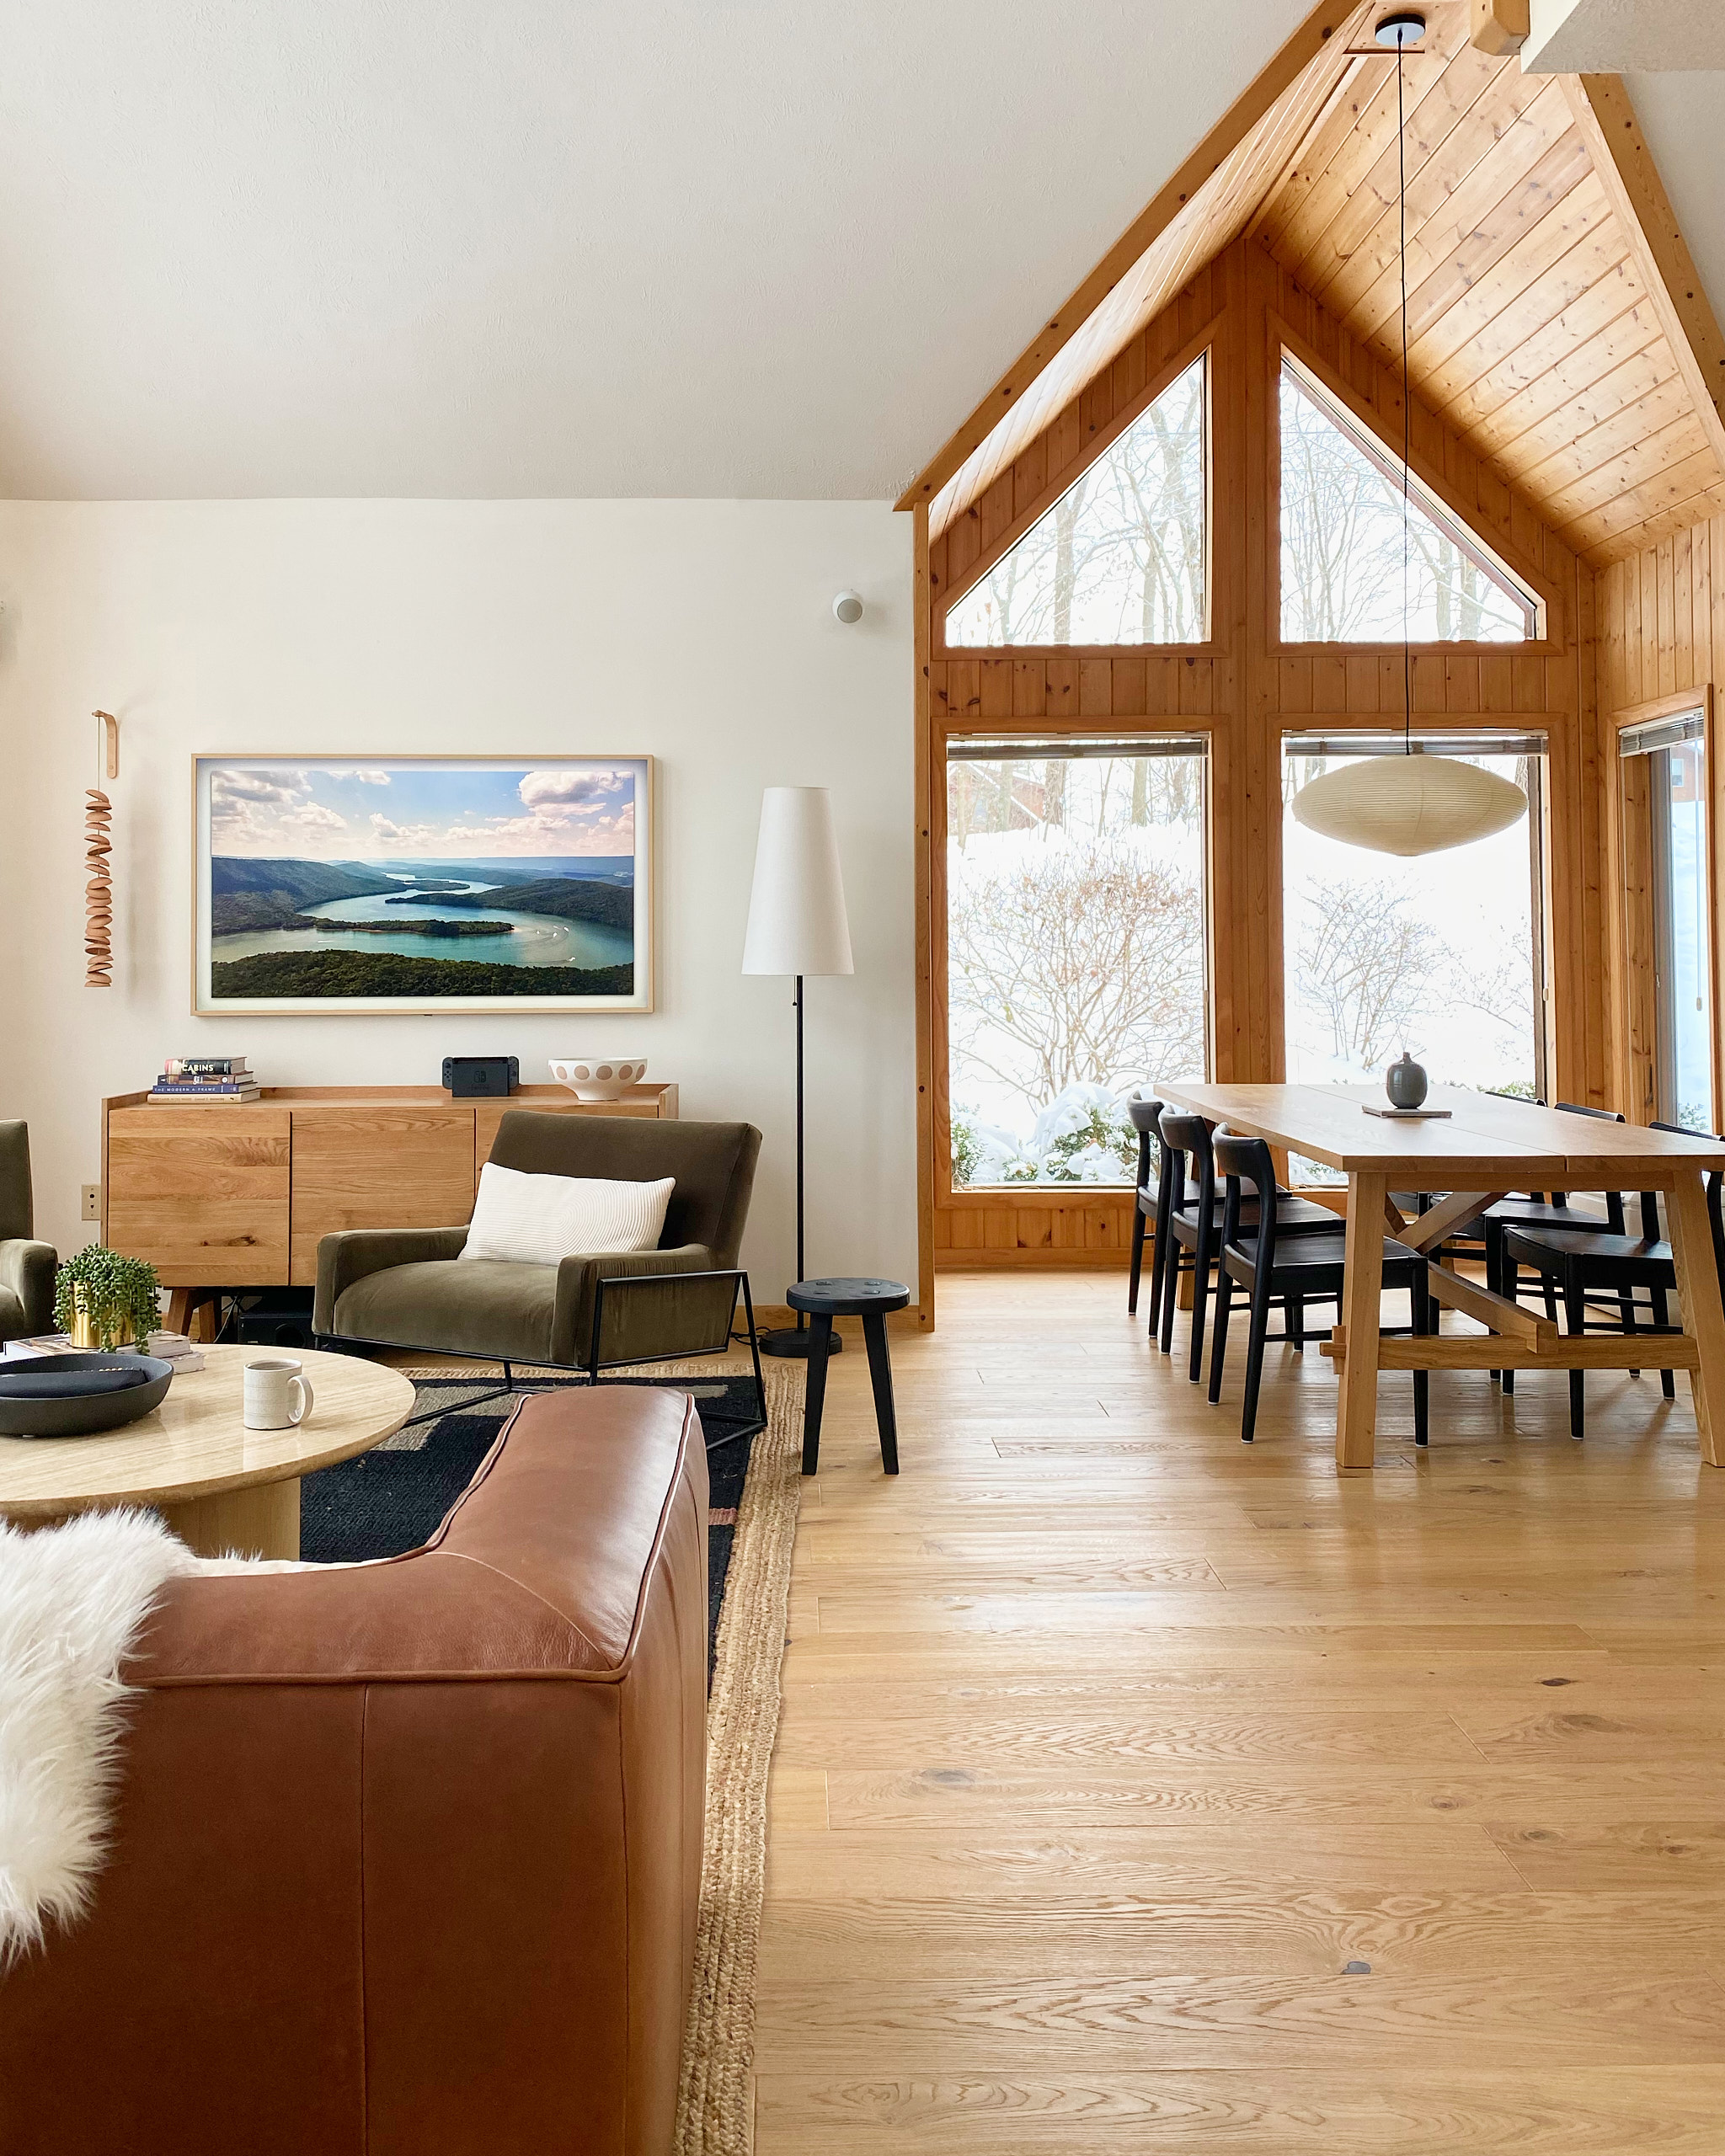 Cabin Interior with wood floors and a view of the snow